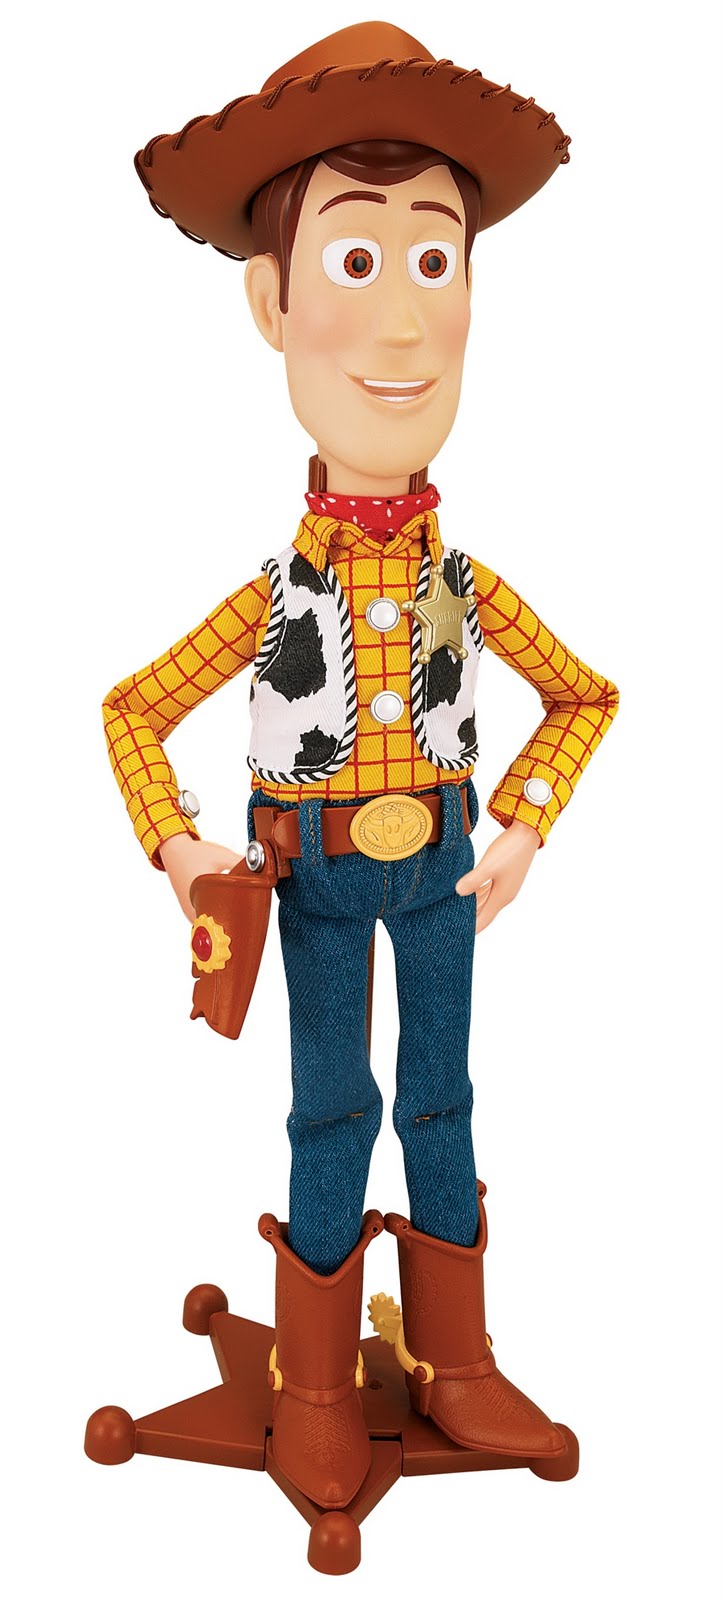 Picture Of Woody From Toy Story 1